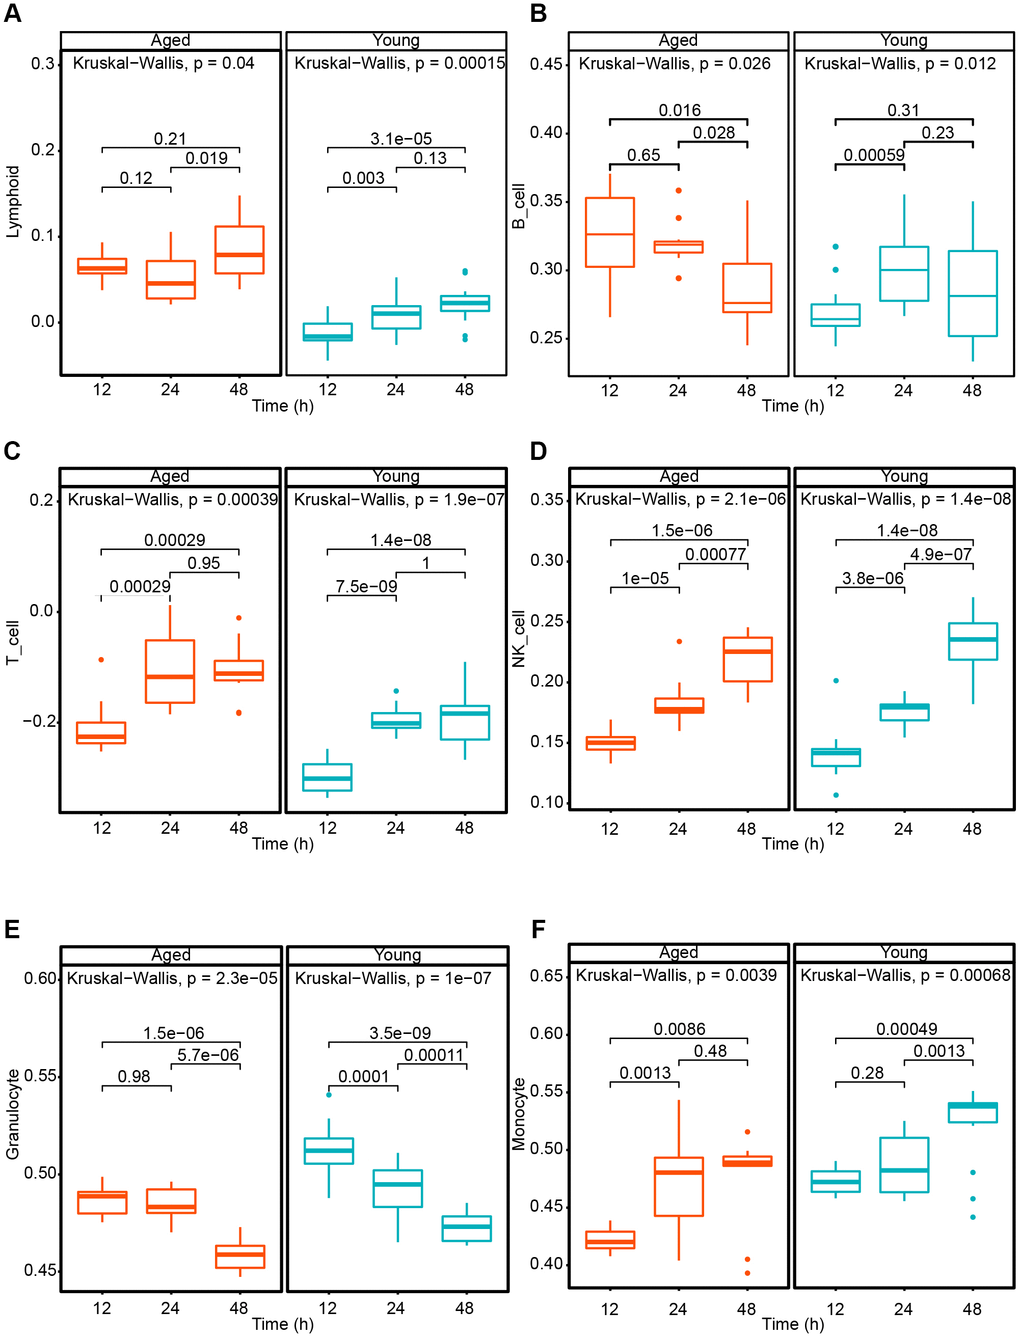 The quantification of immune cell in SARS-CoV infected different age groups mice for 12 and 24 hours based on ssGSEA method. (A) IL-1α; (B) IL-1β; (C) IL-6; (D) IL-7; (E) IL-10; (F) IL-23α.